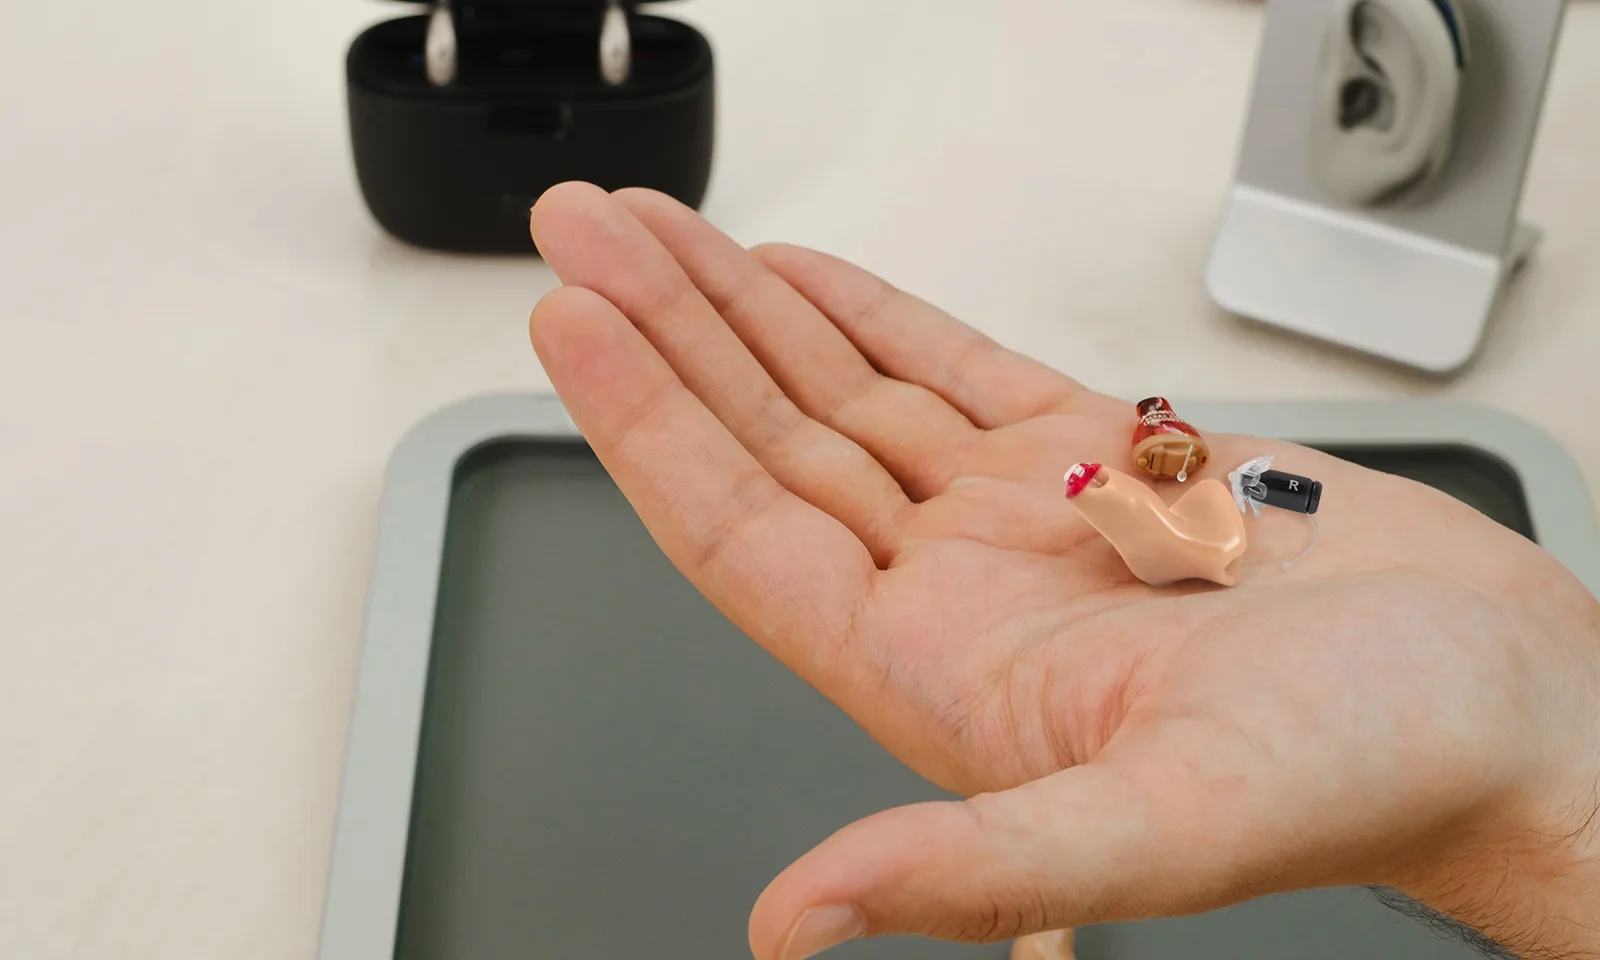 various hearing-aid styles in palm of hand, showing how small Eargo hearing aids are when compared to other styles